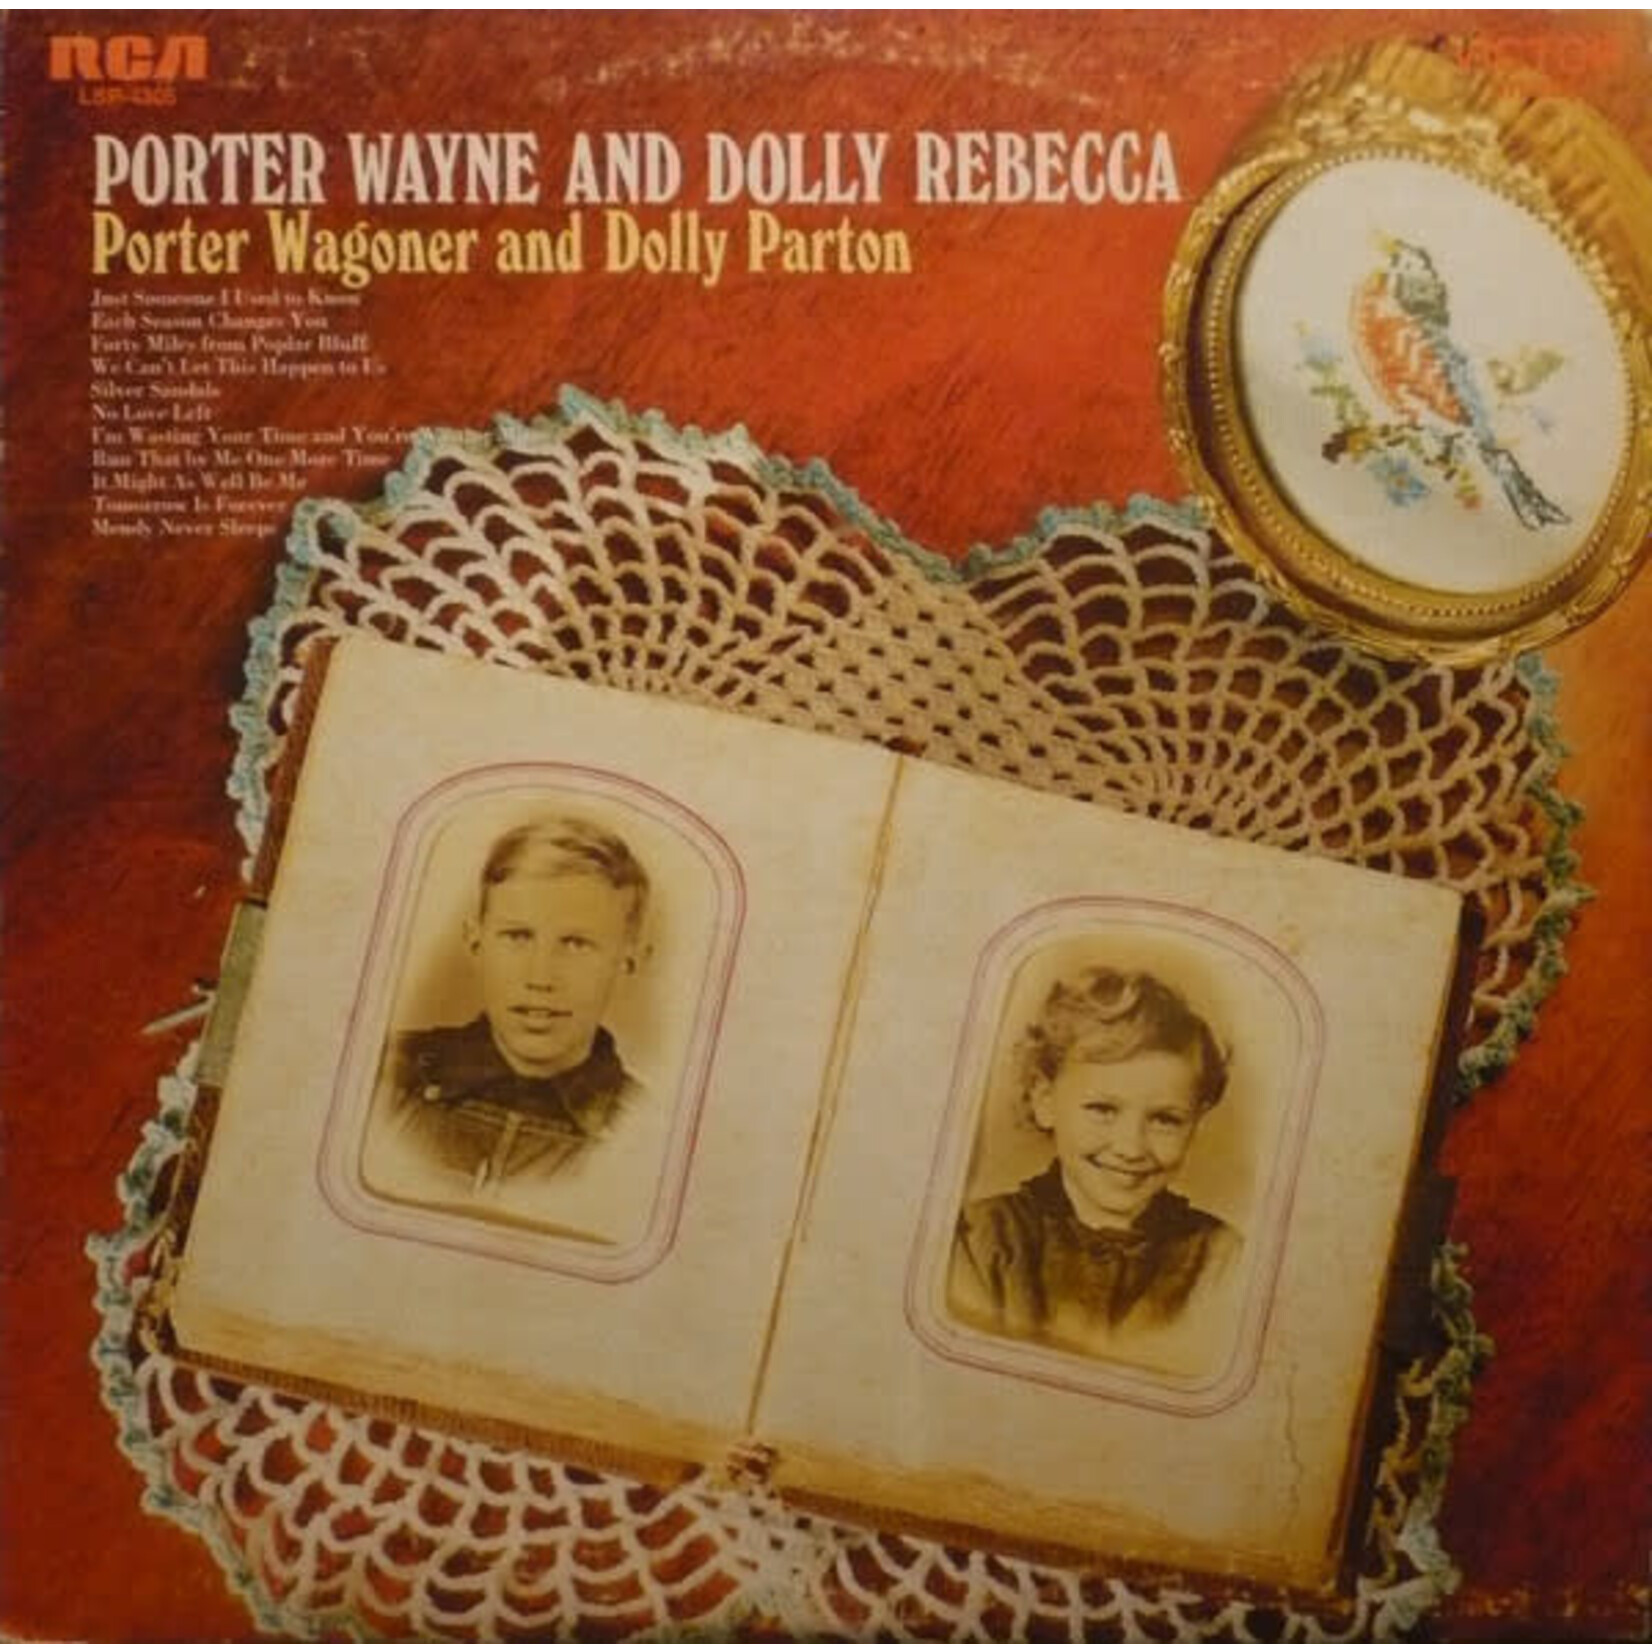 Porter Wagoner And Dolly Parton – Porter Wayne And Dolly Rebecca (VG, 1970, LP, RCA Victor – LSP-4305)